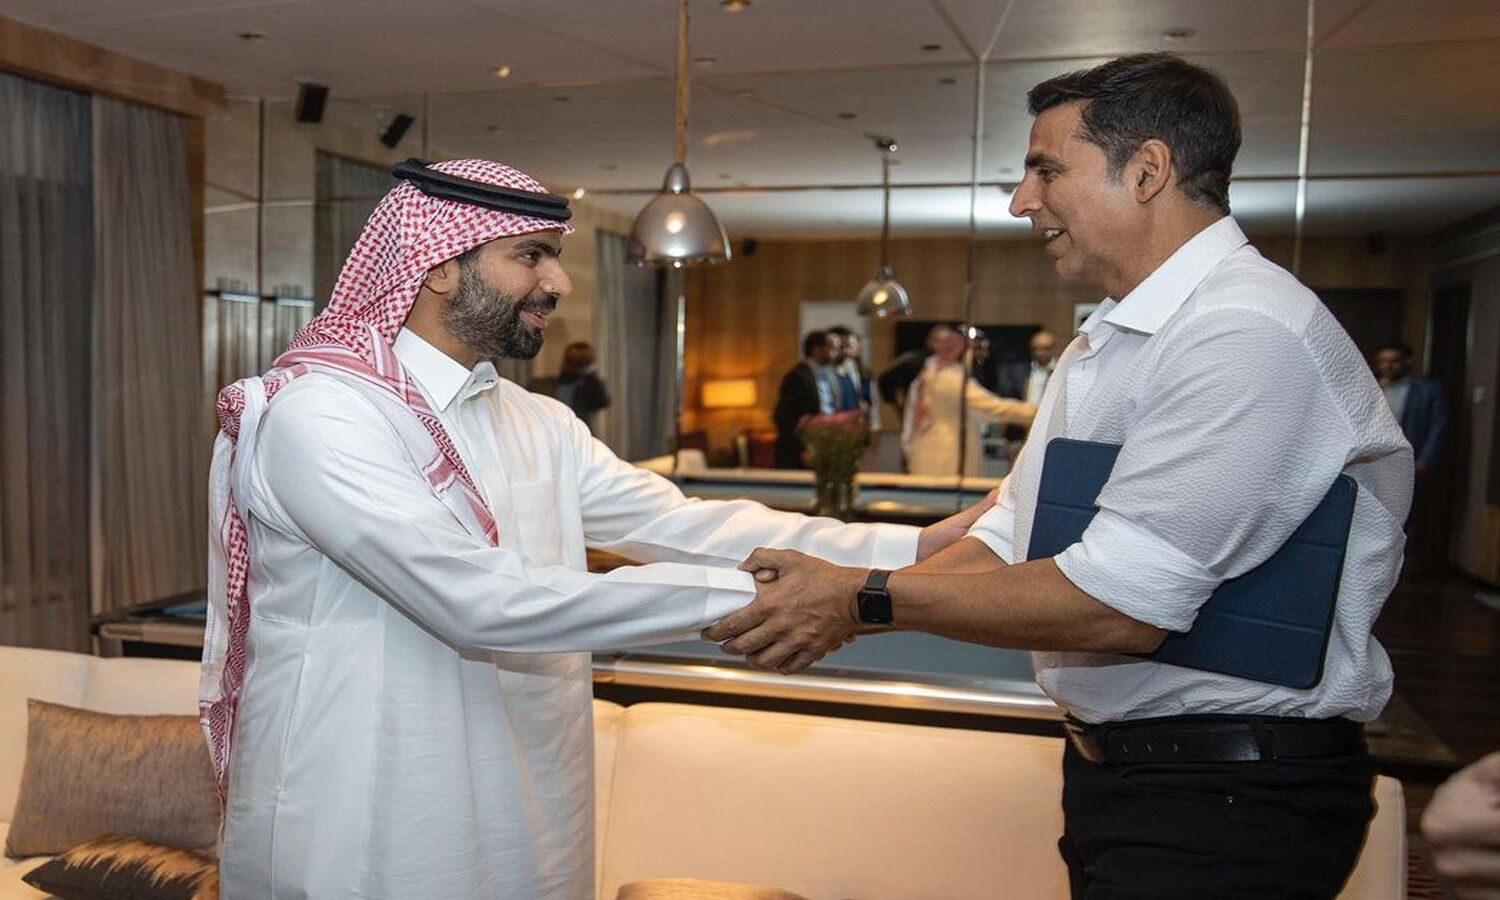 Akshay Kumar and Salman Khan were also spotted with Saudi Minister and Shah Rukh Khan